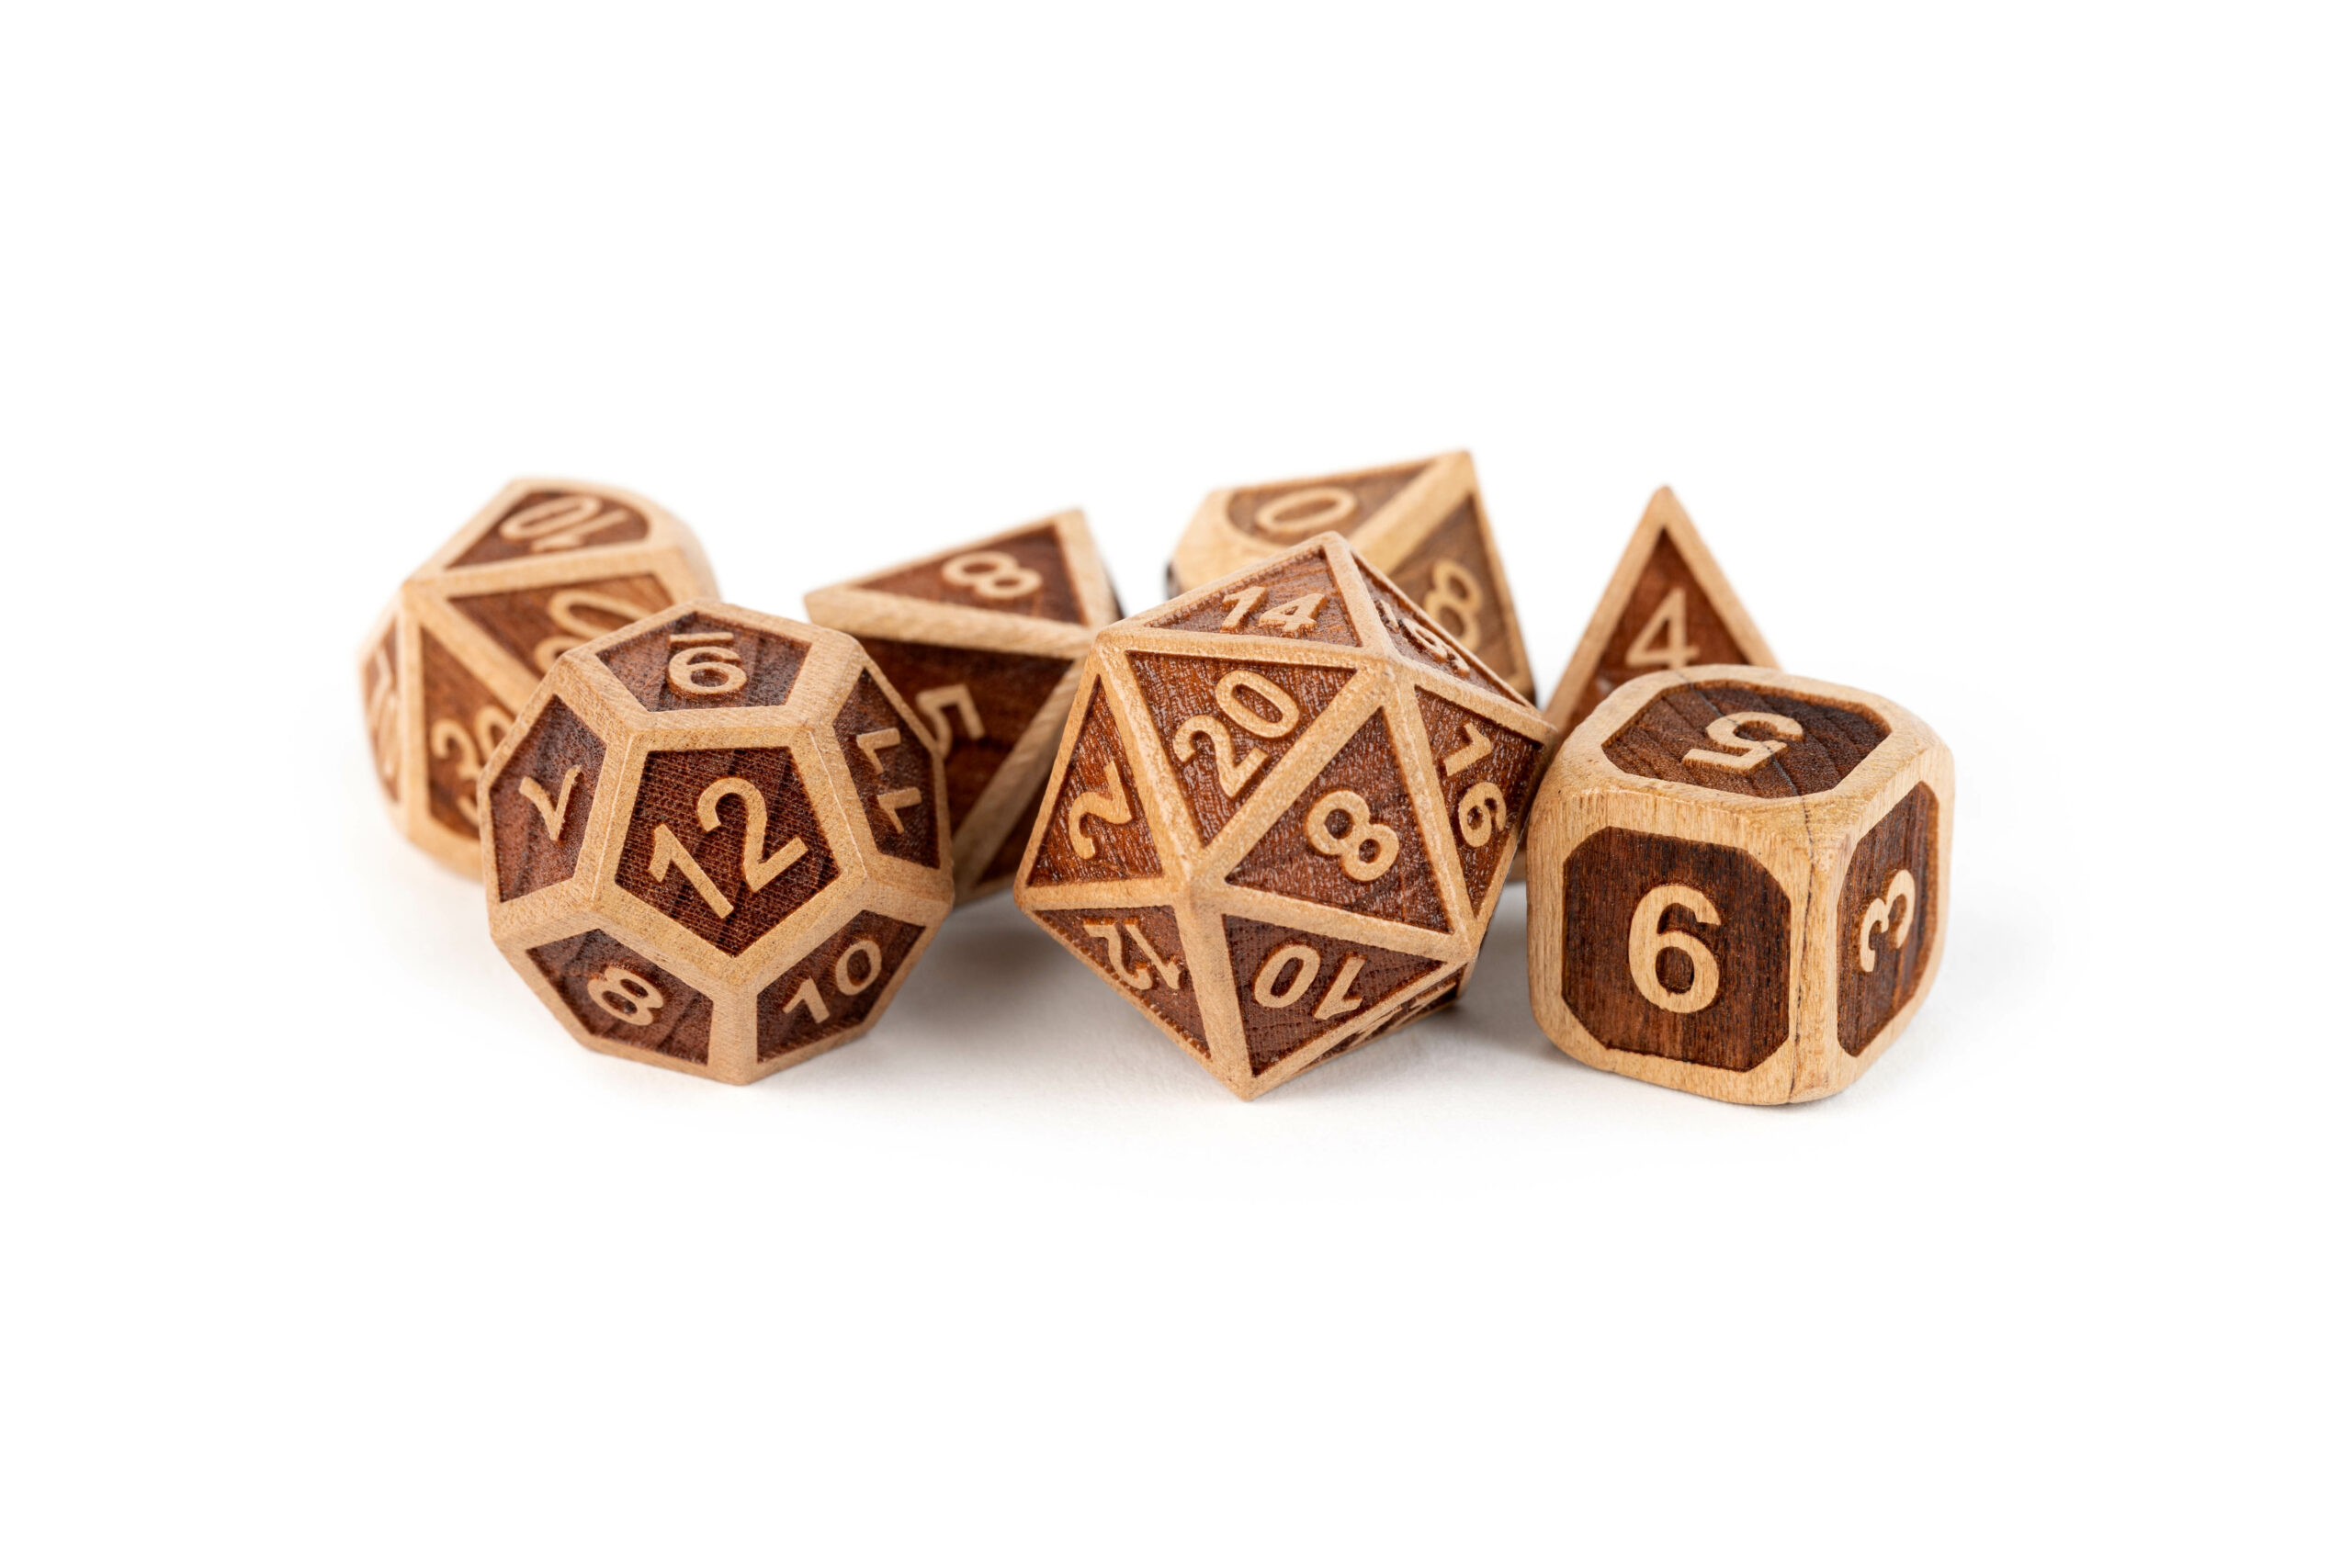 Framed Dice made of Cherry Wood